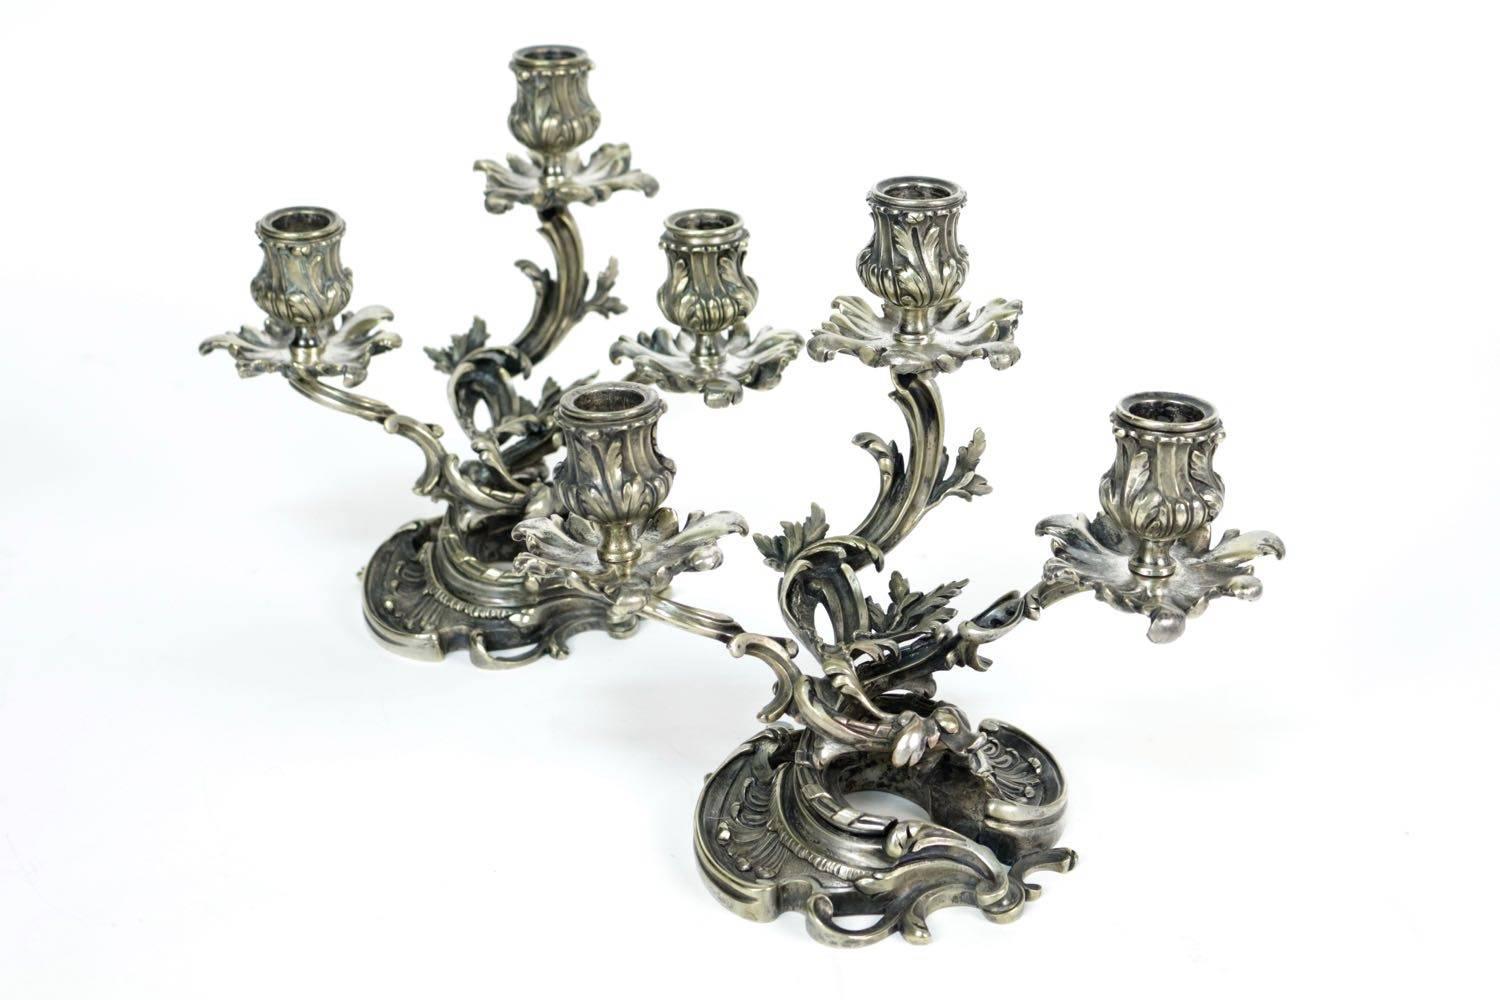 Interesting, rare and pretty small pair of late 19h century Rococo « Bouts de table », Revival silver plate candlesticks in the Louis XV style. The candlesticks are finely chiseled with bold scrollwork and sprigs of foliage.

Henry Vian was the